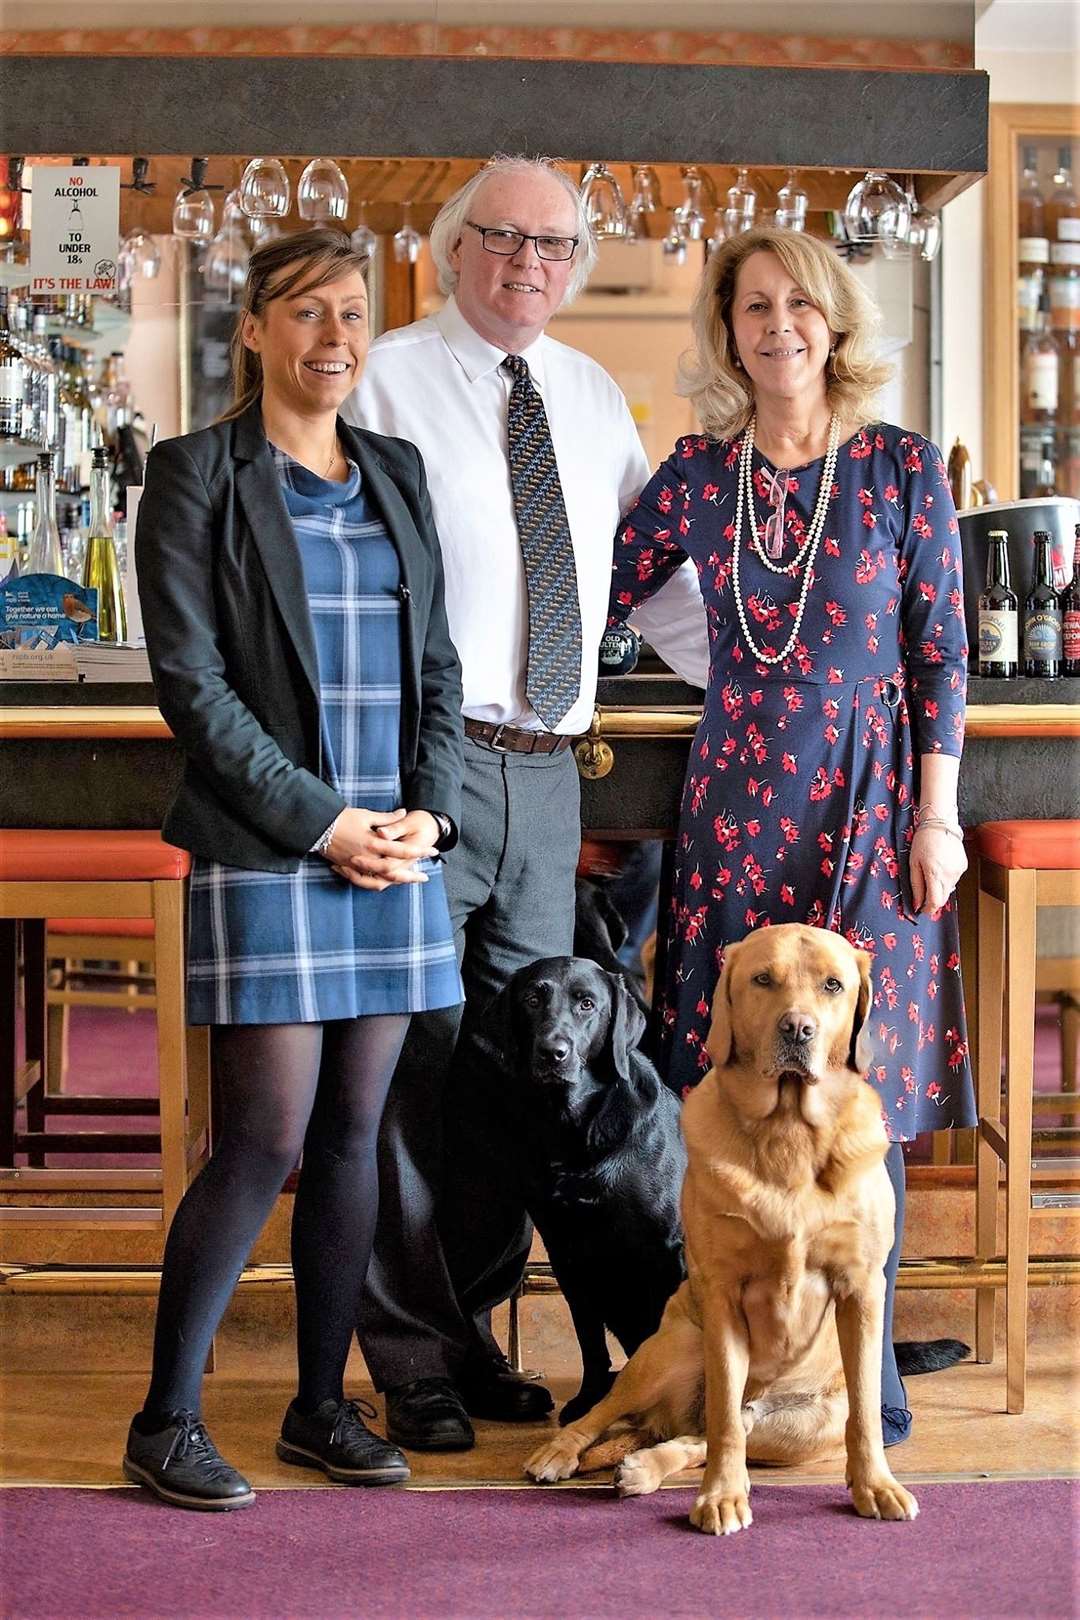 The Lamont family at Mackays Hotel in Wick – Jennifer, Murray and Ellie, together with dogs Bria and Max.